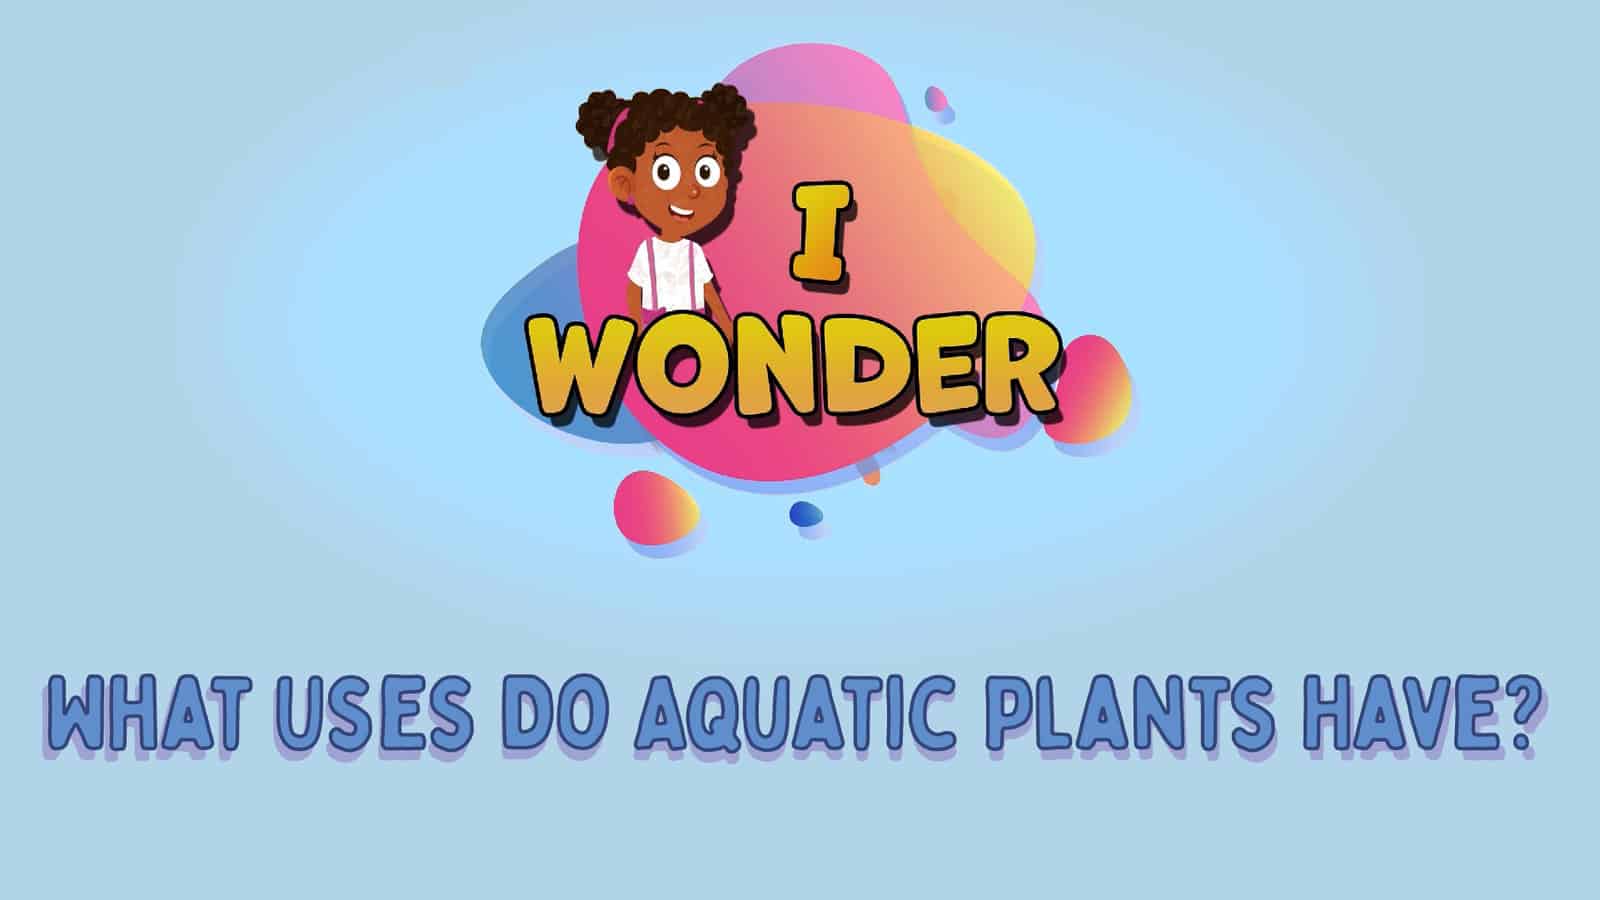 What Uses Do Aquatic Plants Have?